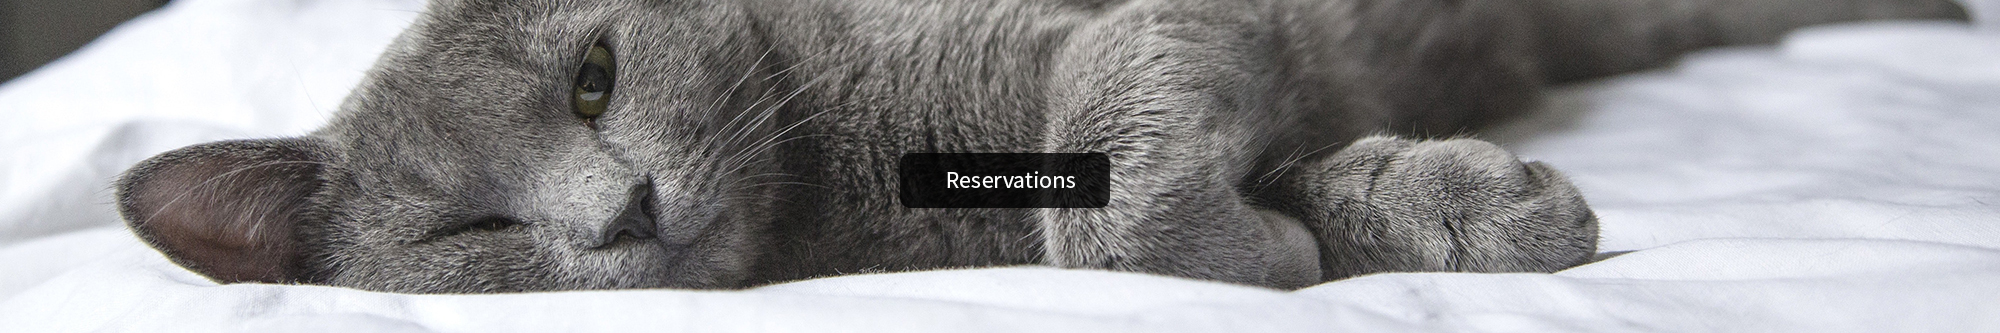 Resesrvations - Catnaps Hotel - cat boarding Williamsville NY